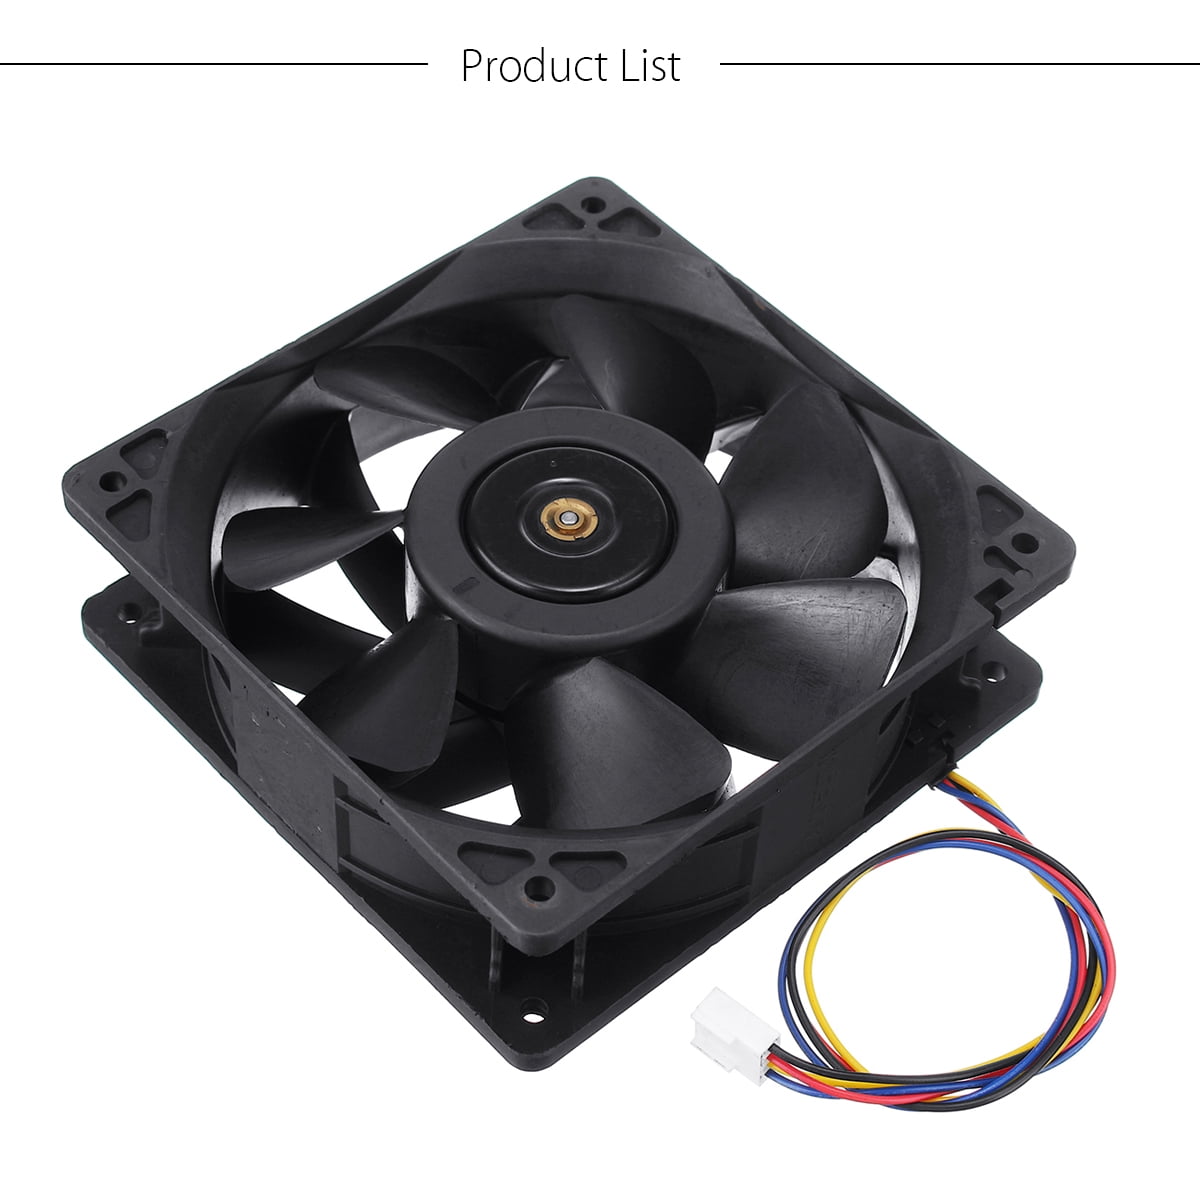 Cooling Fan Replacement 6000RPM 4-pin Connector For Antminer Bitmain S7 S9 